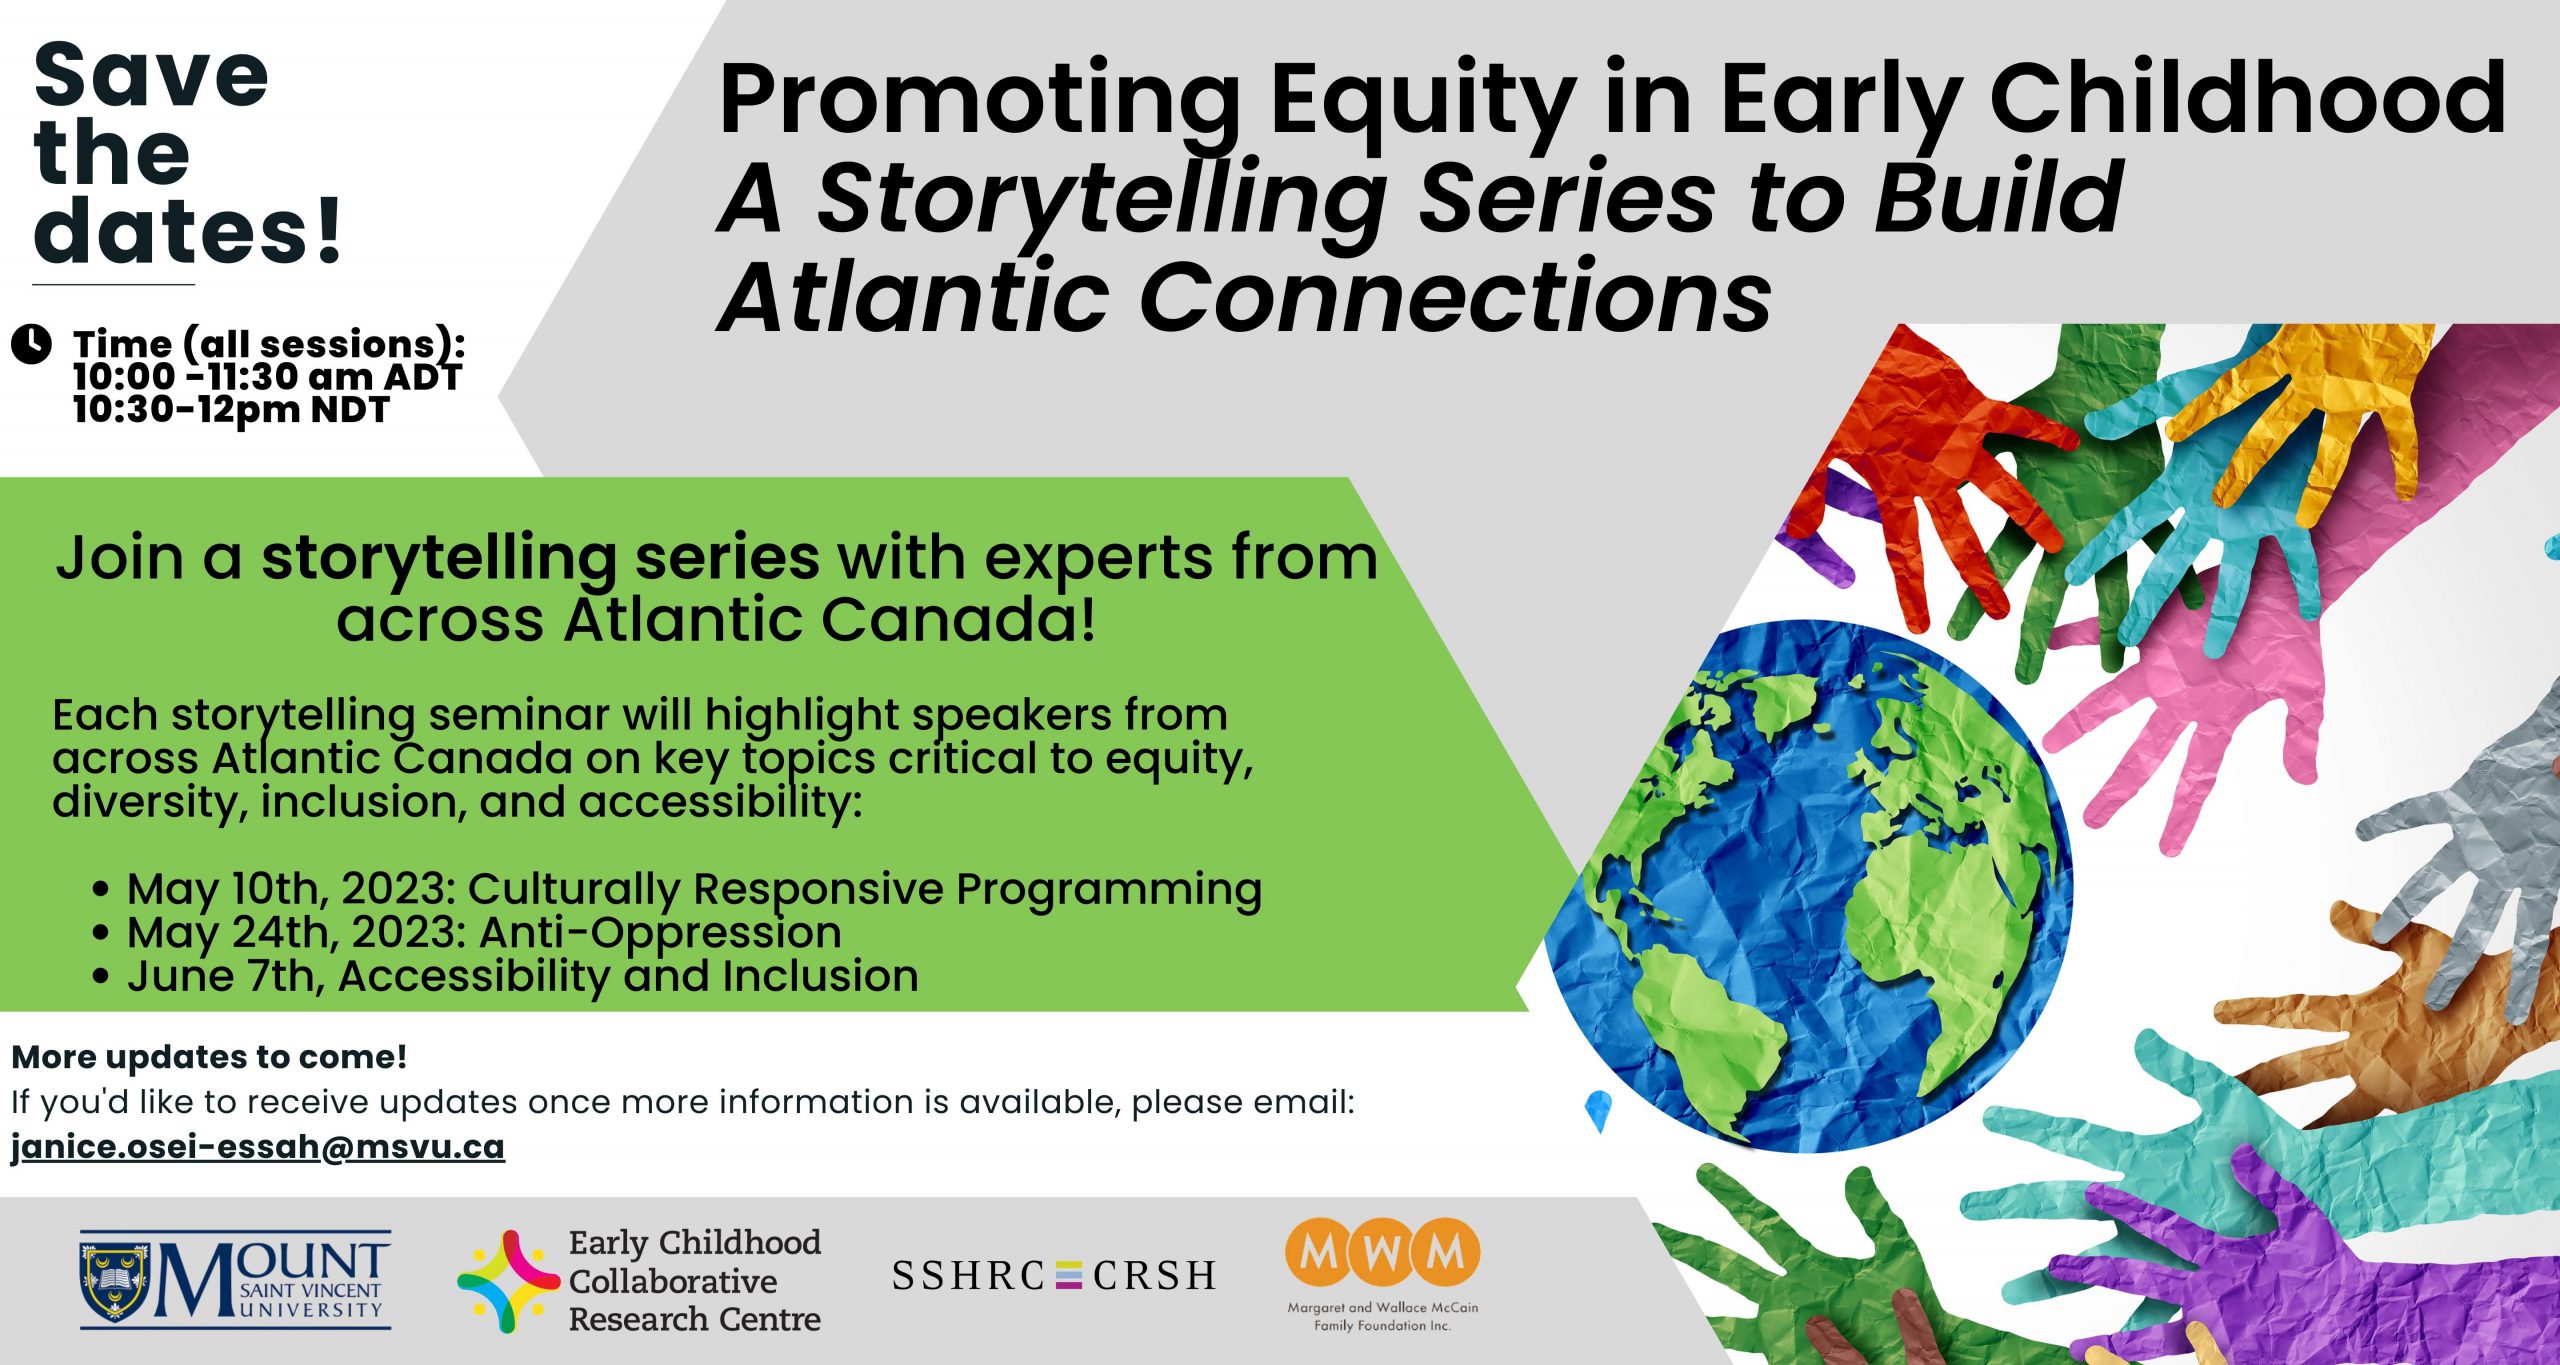 Save the date: Each storytelling seminar will highlight speakers from across Atlantic Canada on key topics critical to equity, diversity, inclusion, and accessibility: May 10th, 2023: Culturally Responsive Programming May 24th, 2023: Anti-Oppression June 7th, Accessibility and Inclusion.